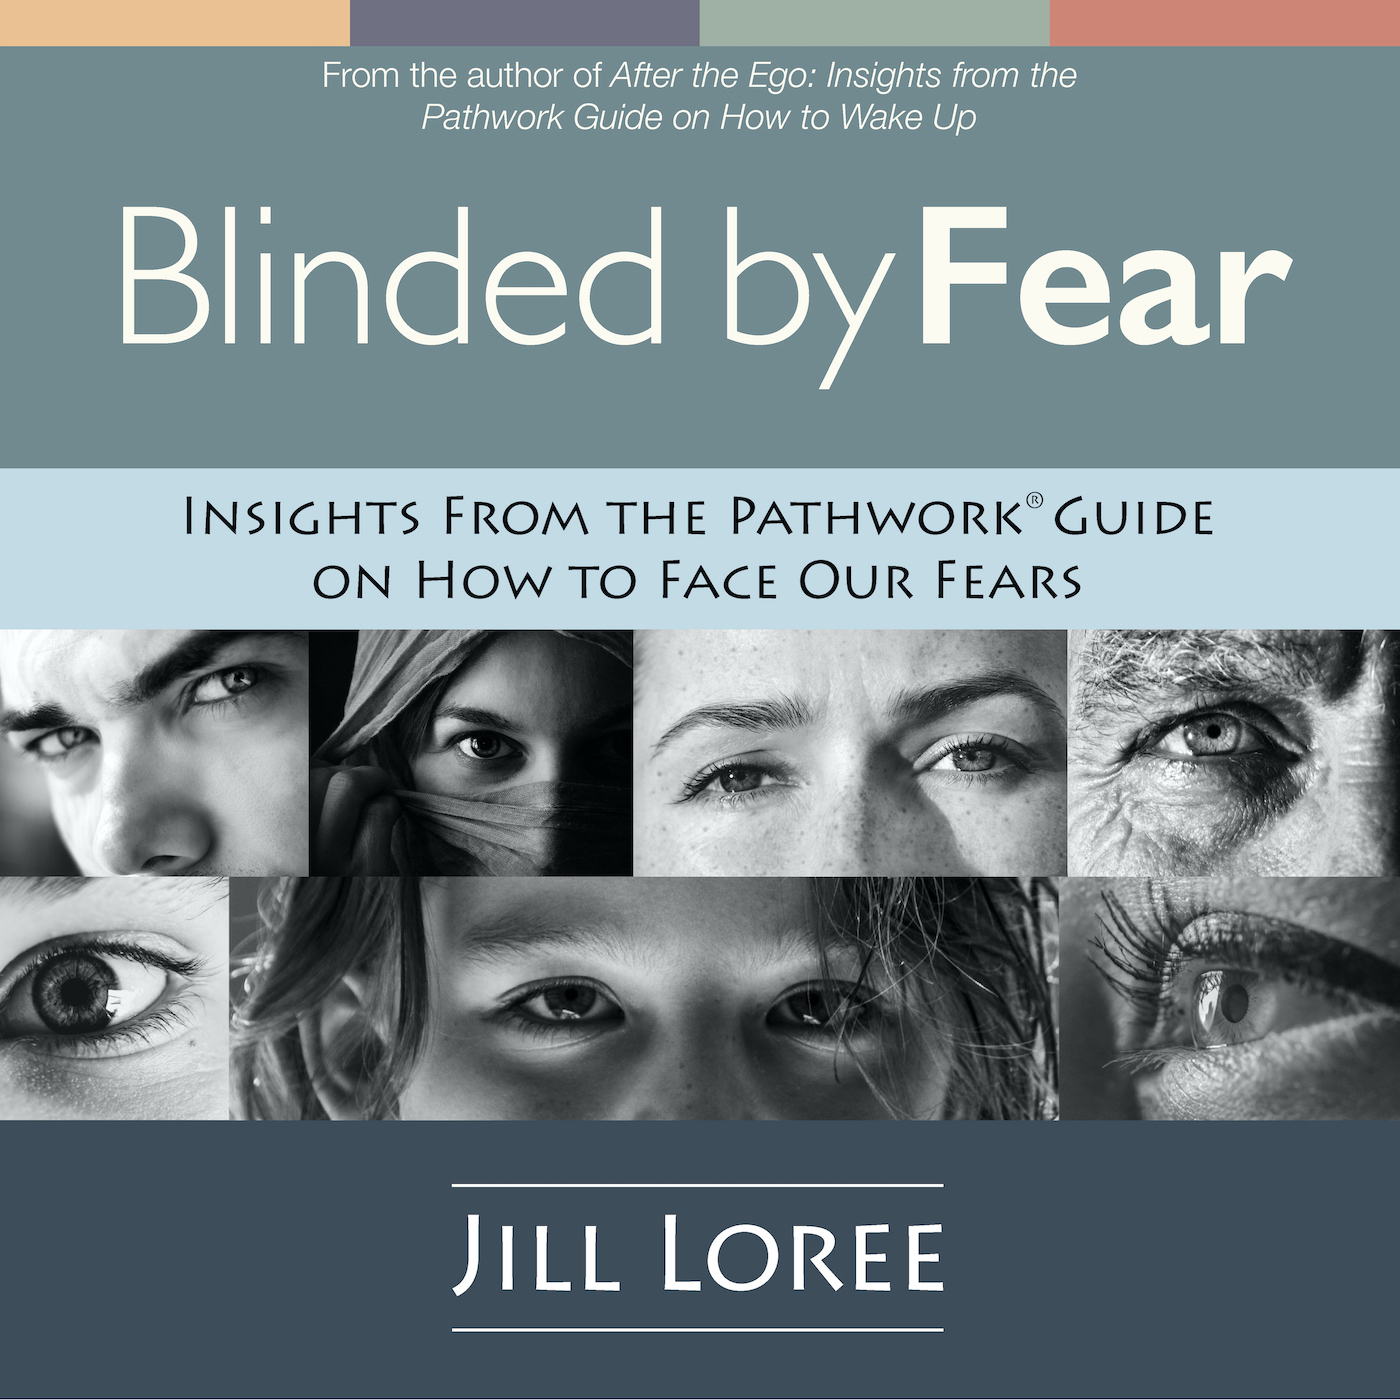 Blinded by Fear